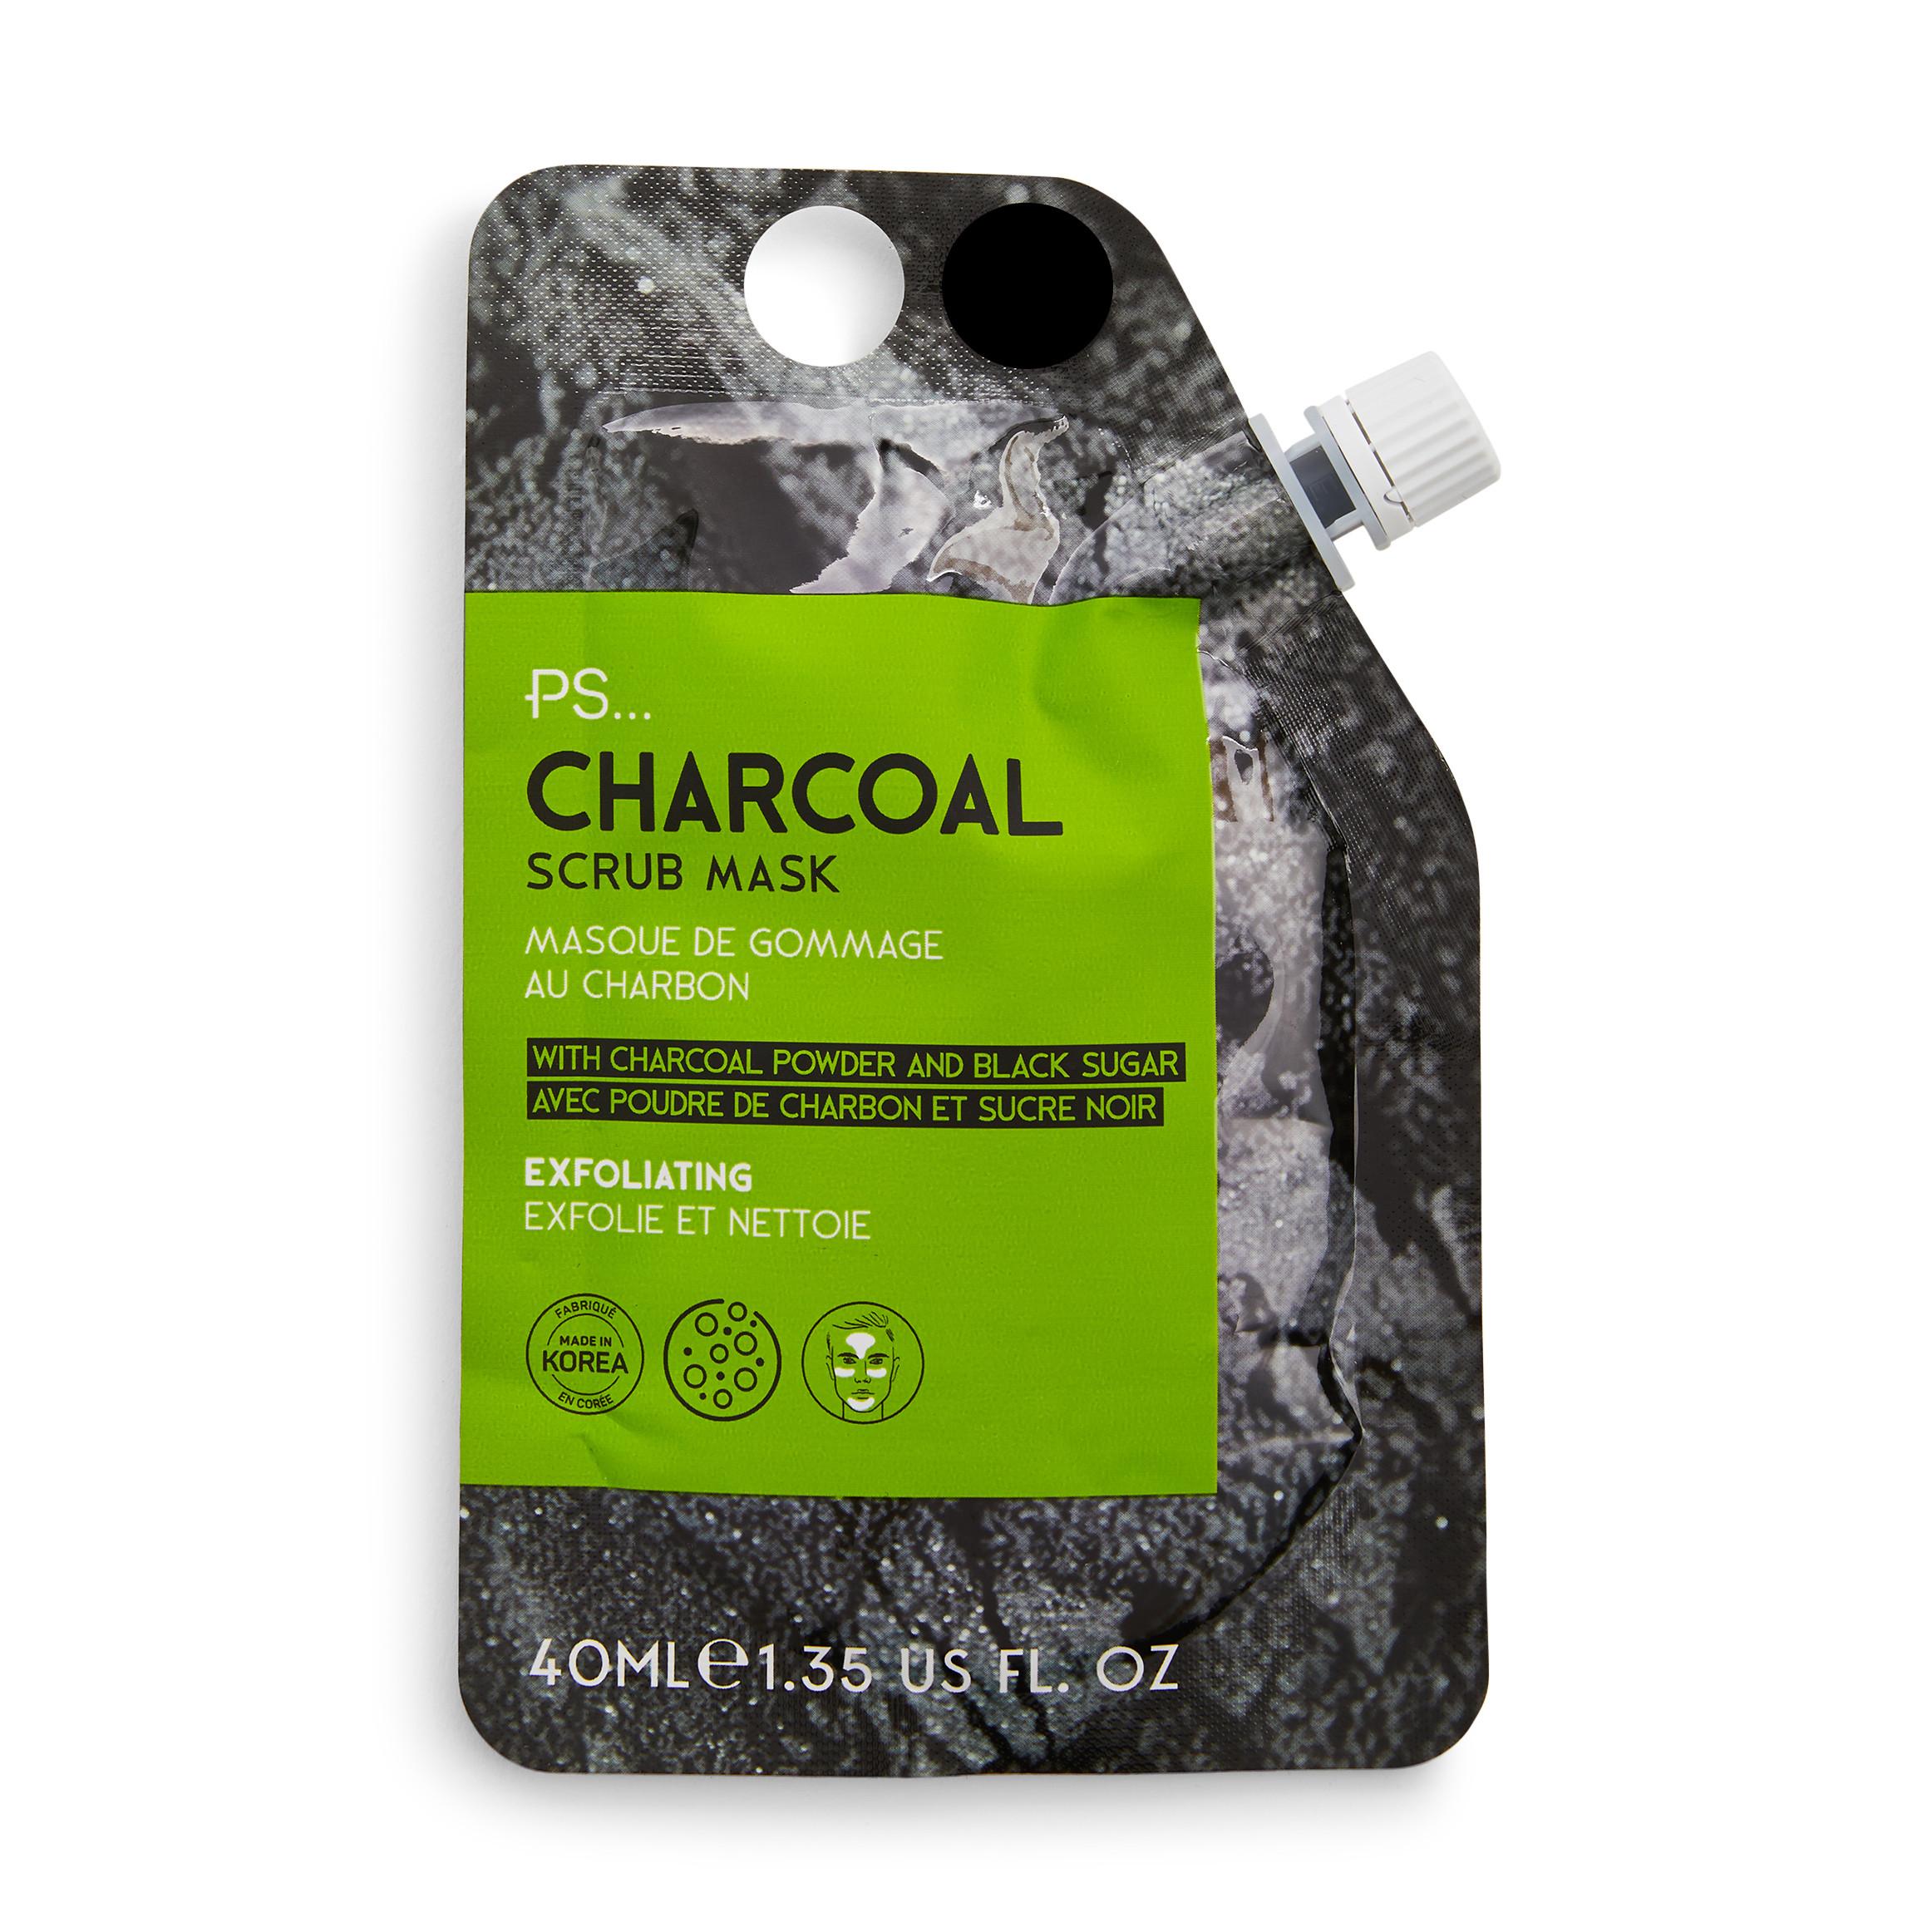 Ps Charcoal Scrub Face Mask Pouch | Men's Grooming | Men's Accessories 